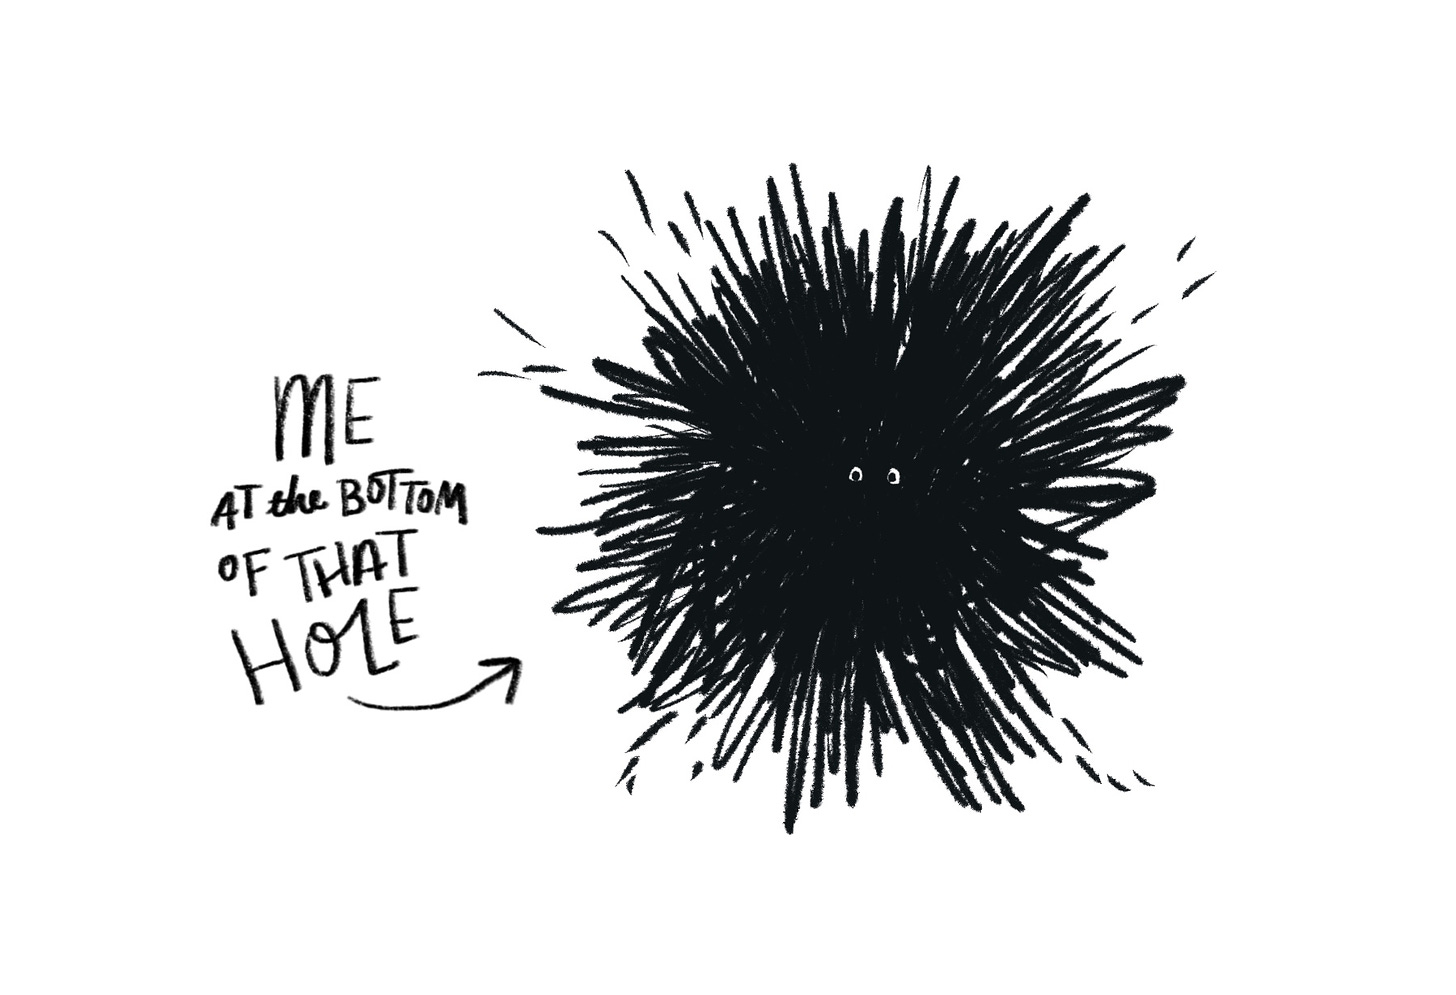 An inky line drawing or a ragged hole, fully black at the bottom, with two eyes looking up at us. Handwritten text reads "Me at the bottom of that hole" with an arrow pointing to the eyes.